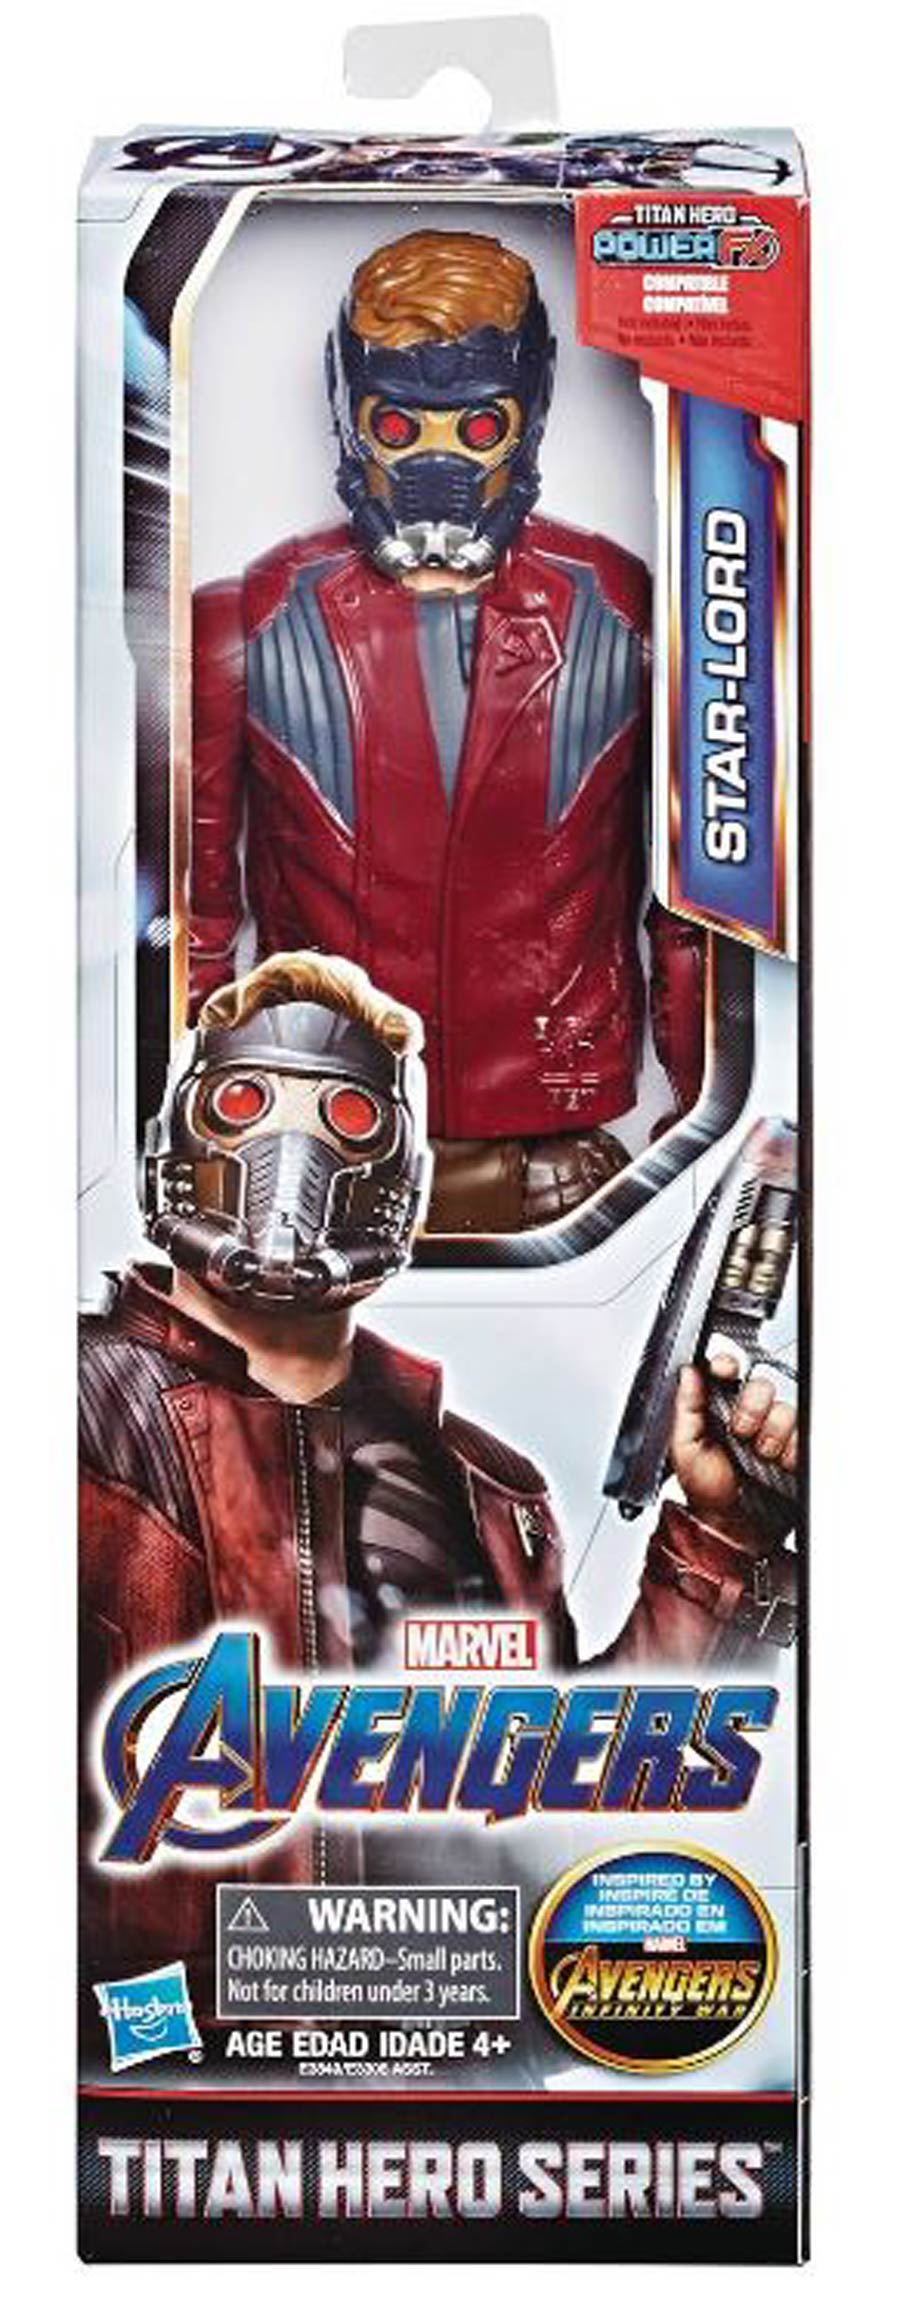 Avengers Endgame Titan Heroes 12-Inch Action Figure Assortment 201901-B - Star-Lord